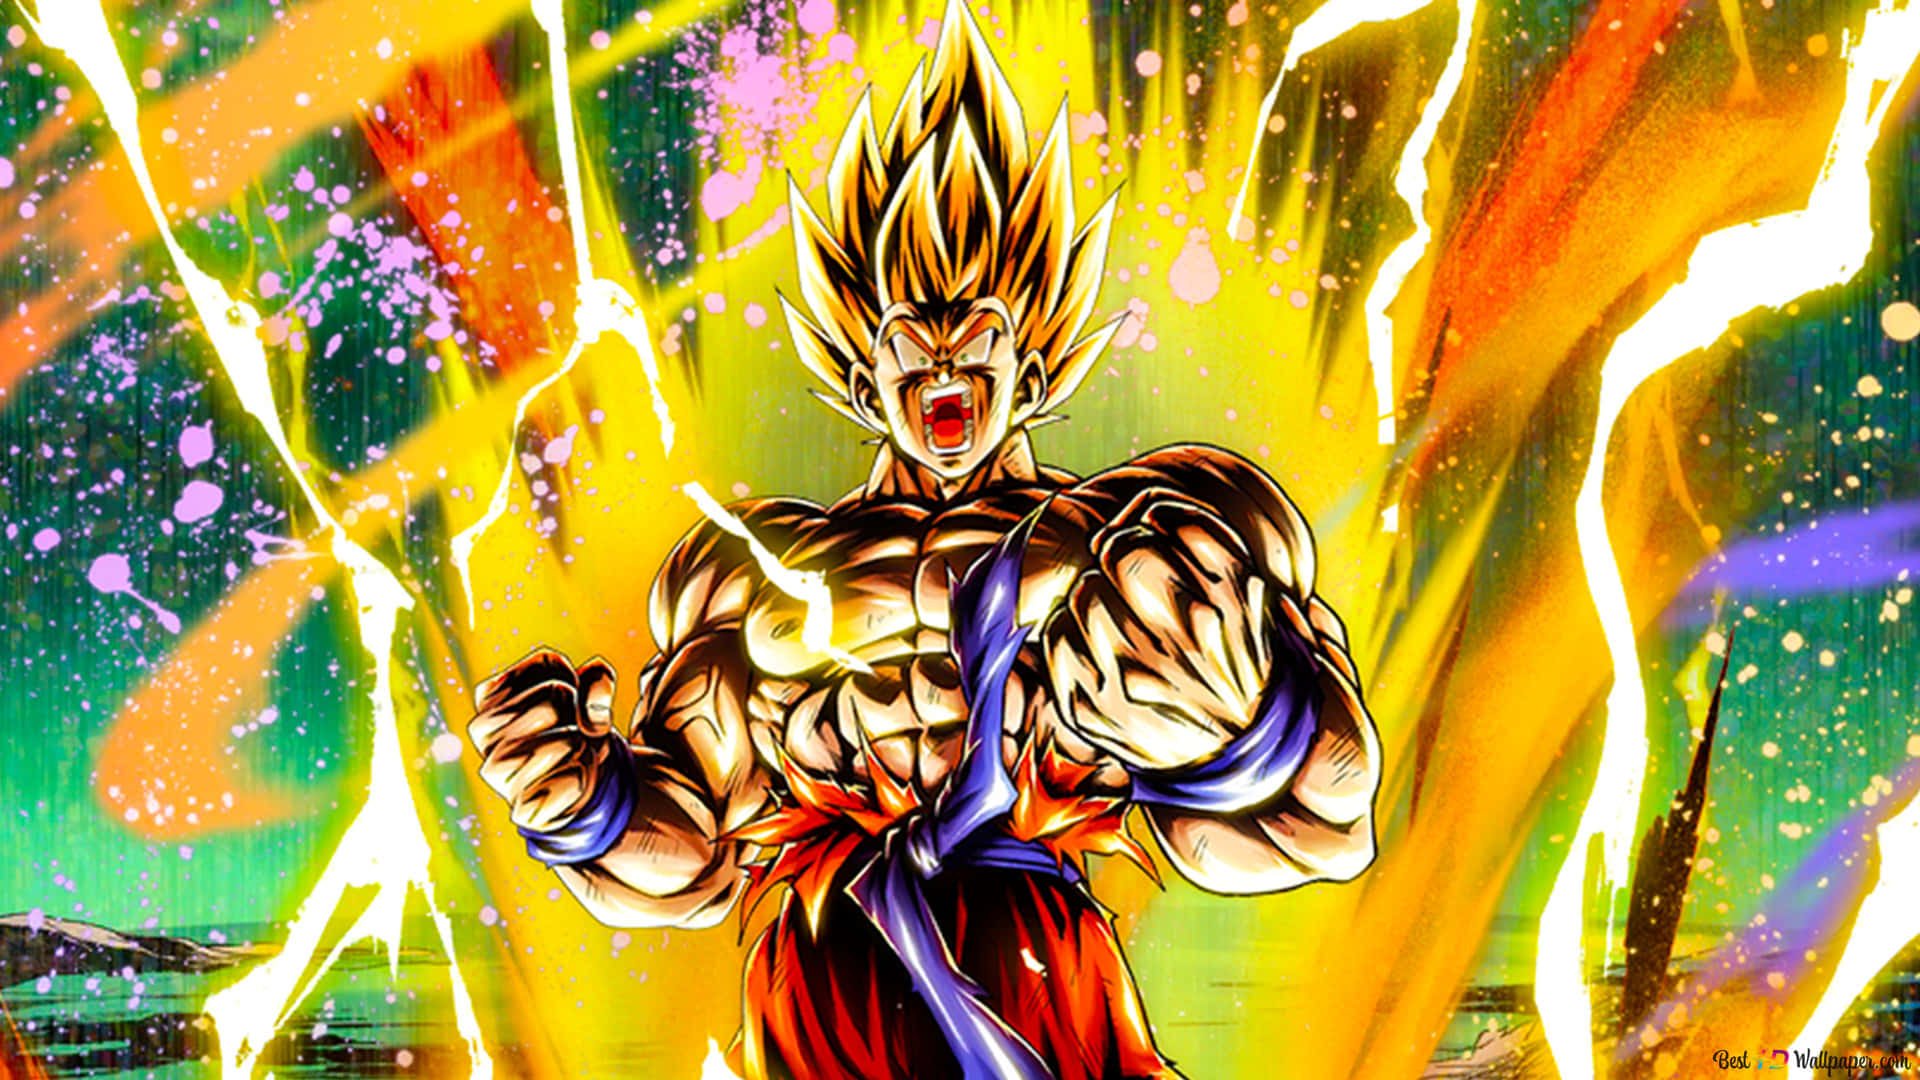 Unleash your inner anger with Goku Wallpaper